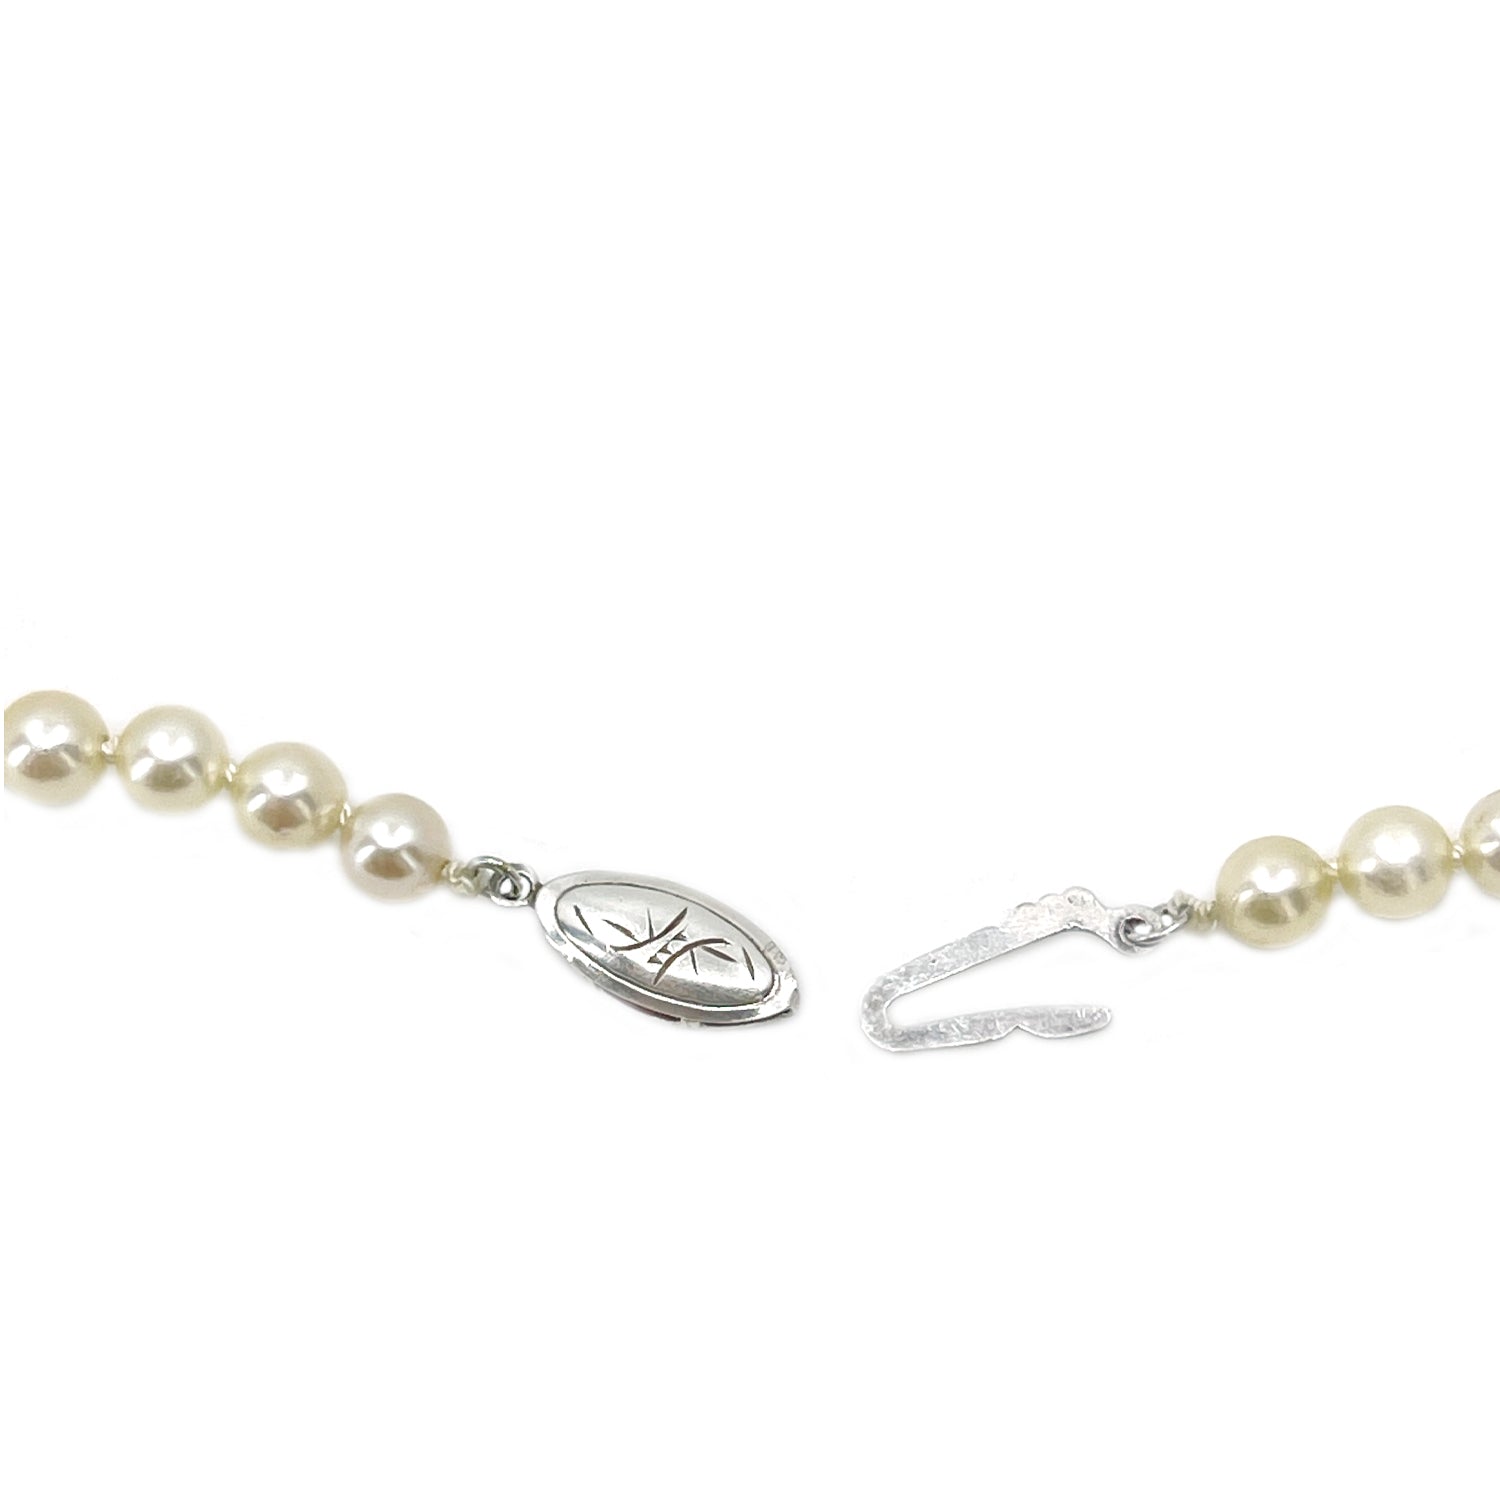 Art Deco Engraved Japanese Saltwater Cultured Akoya Pearl Vintage Choker Necklace - Sterling Silver 16.50 Inch